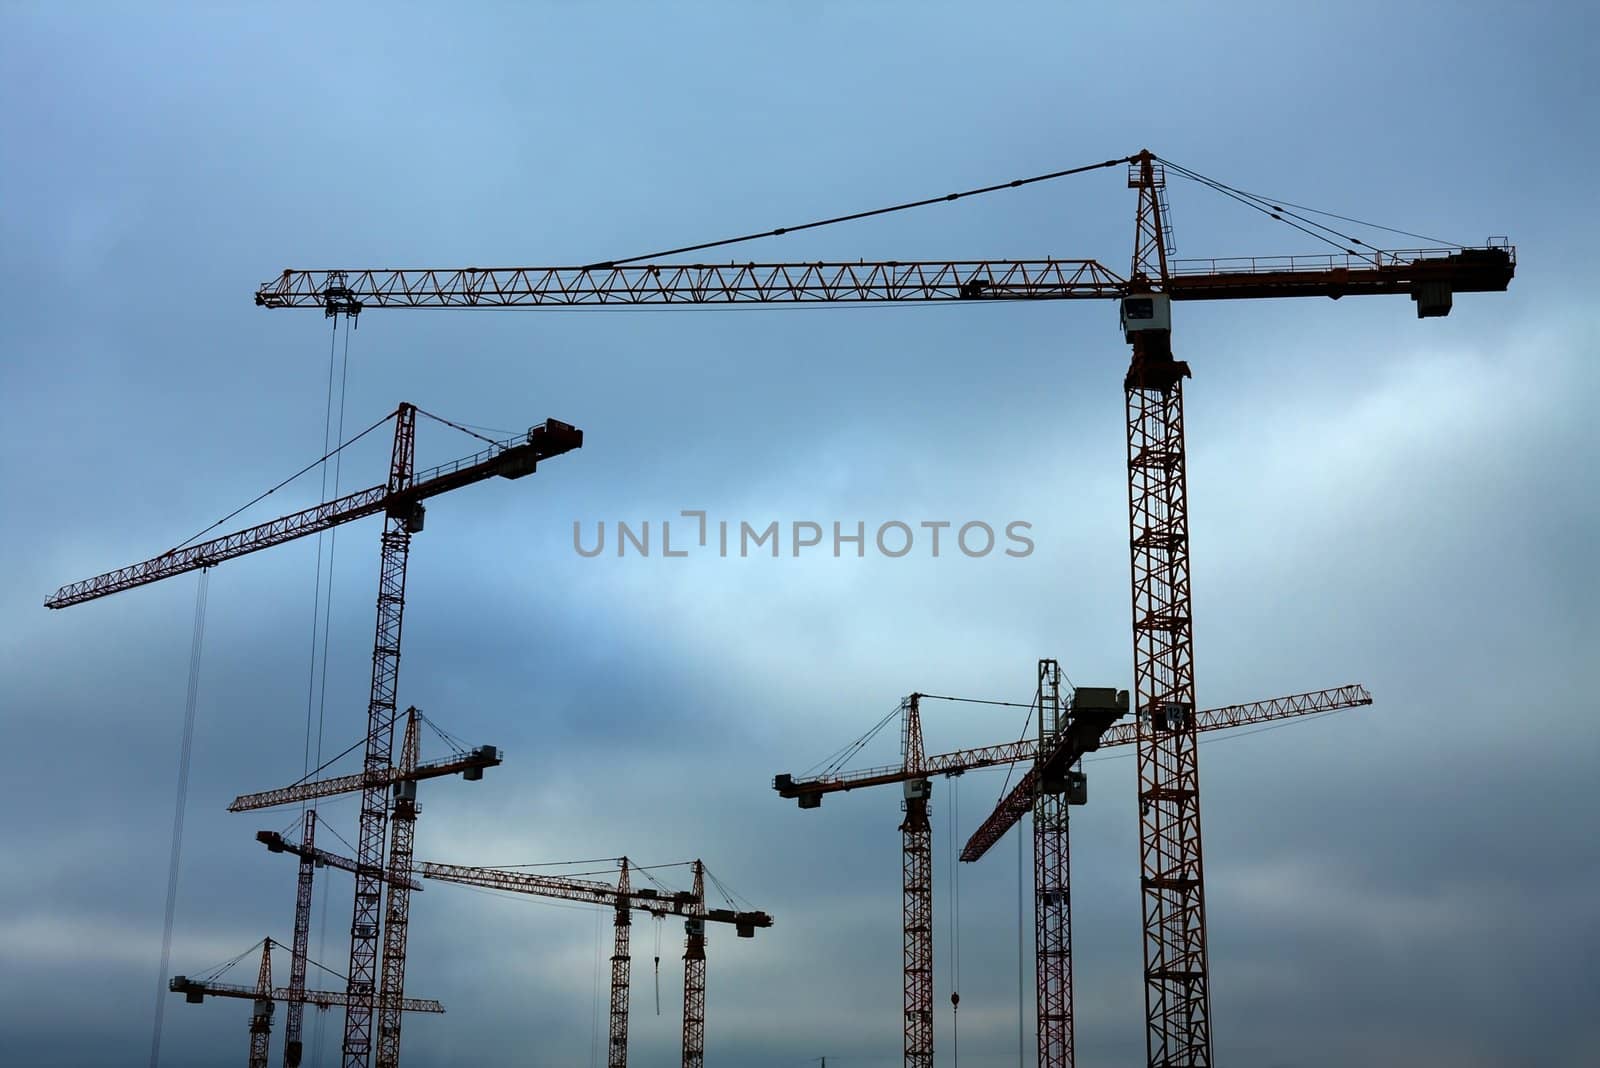 Many tower cranes at a construction site